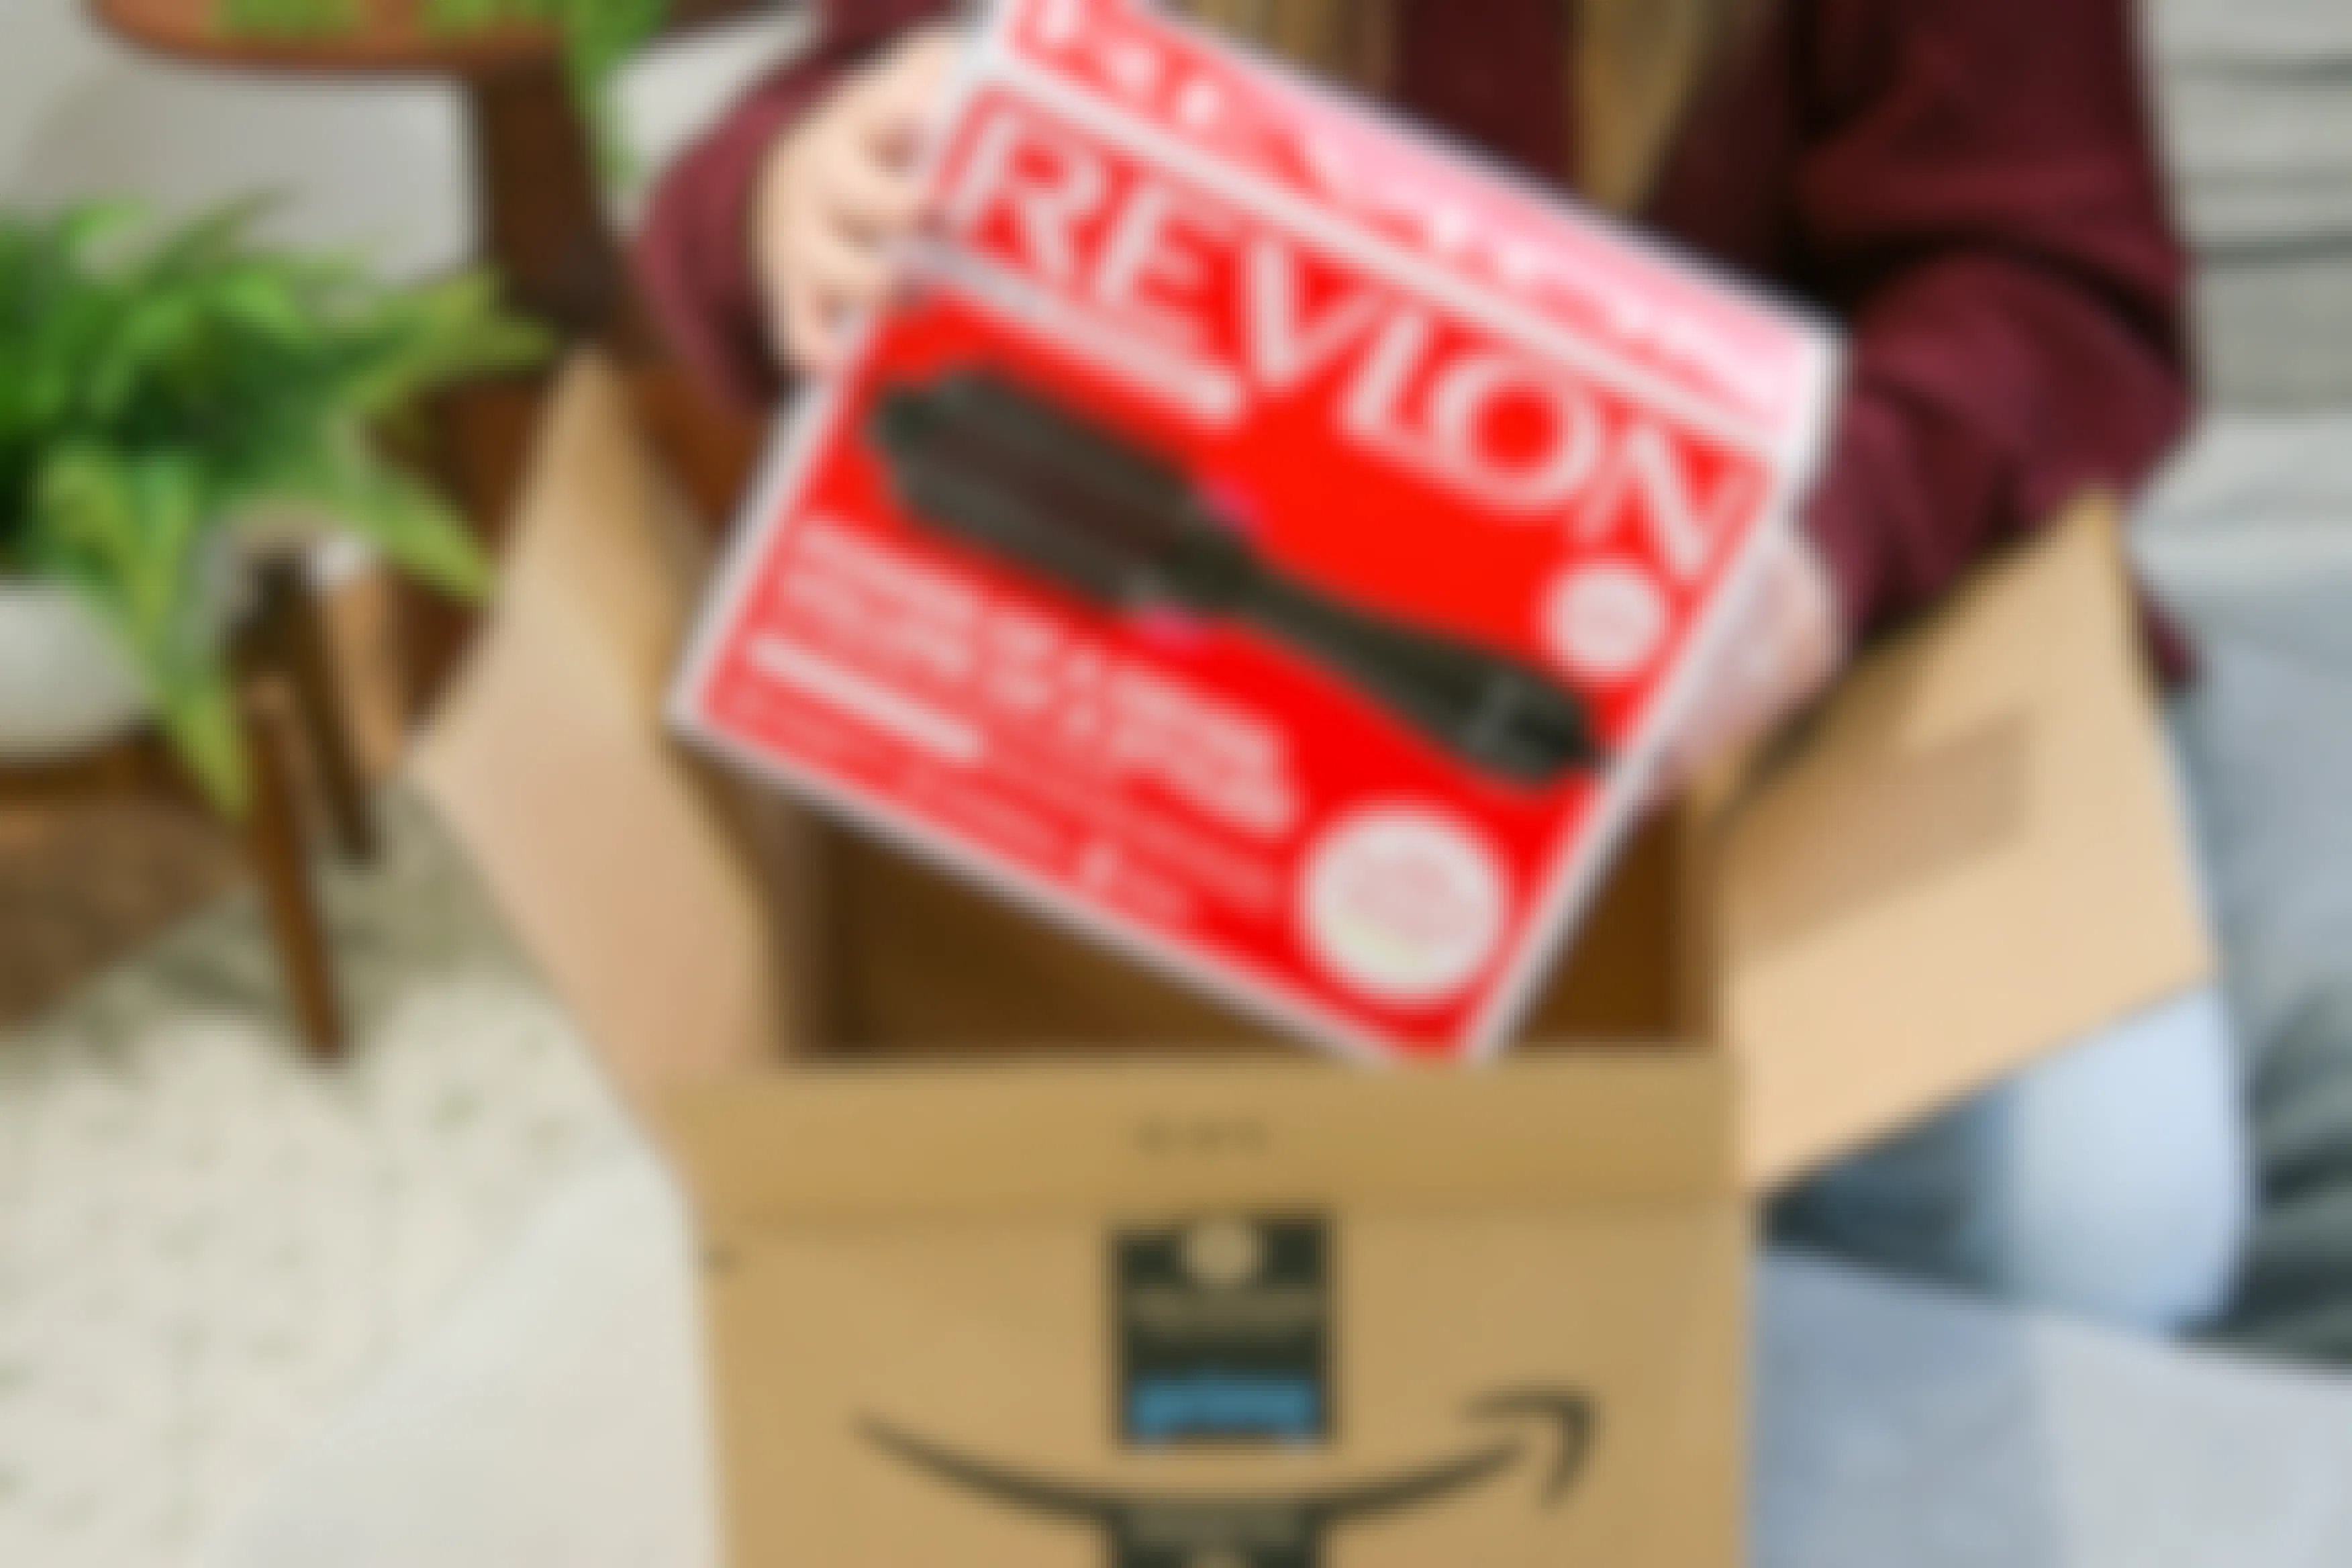 revlon dryer brush being removed from amazon box